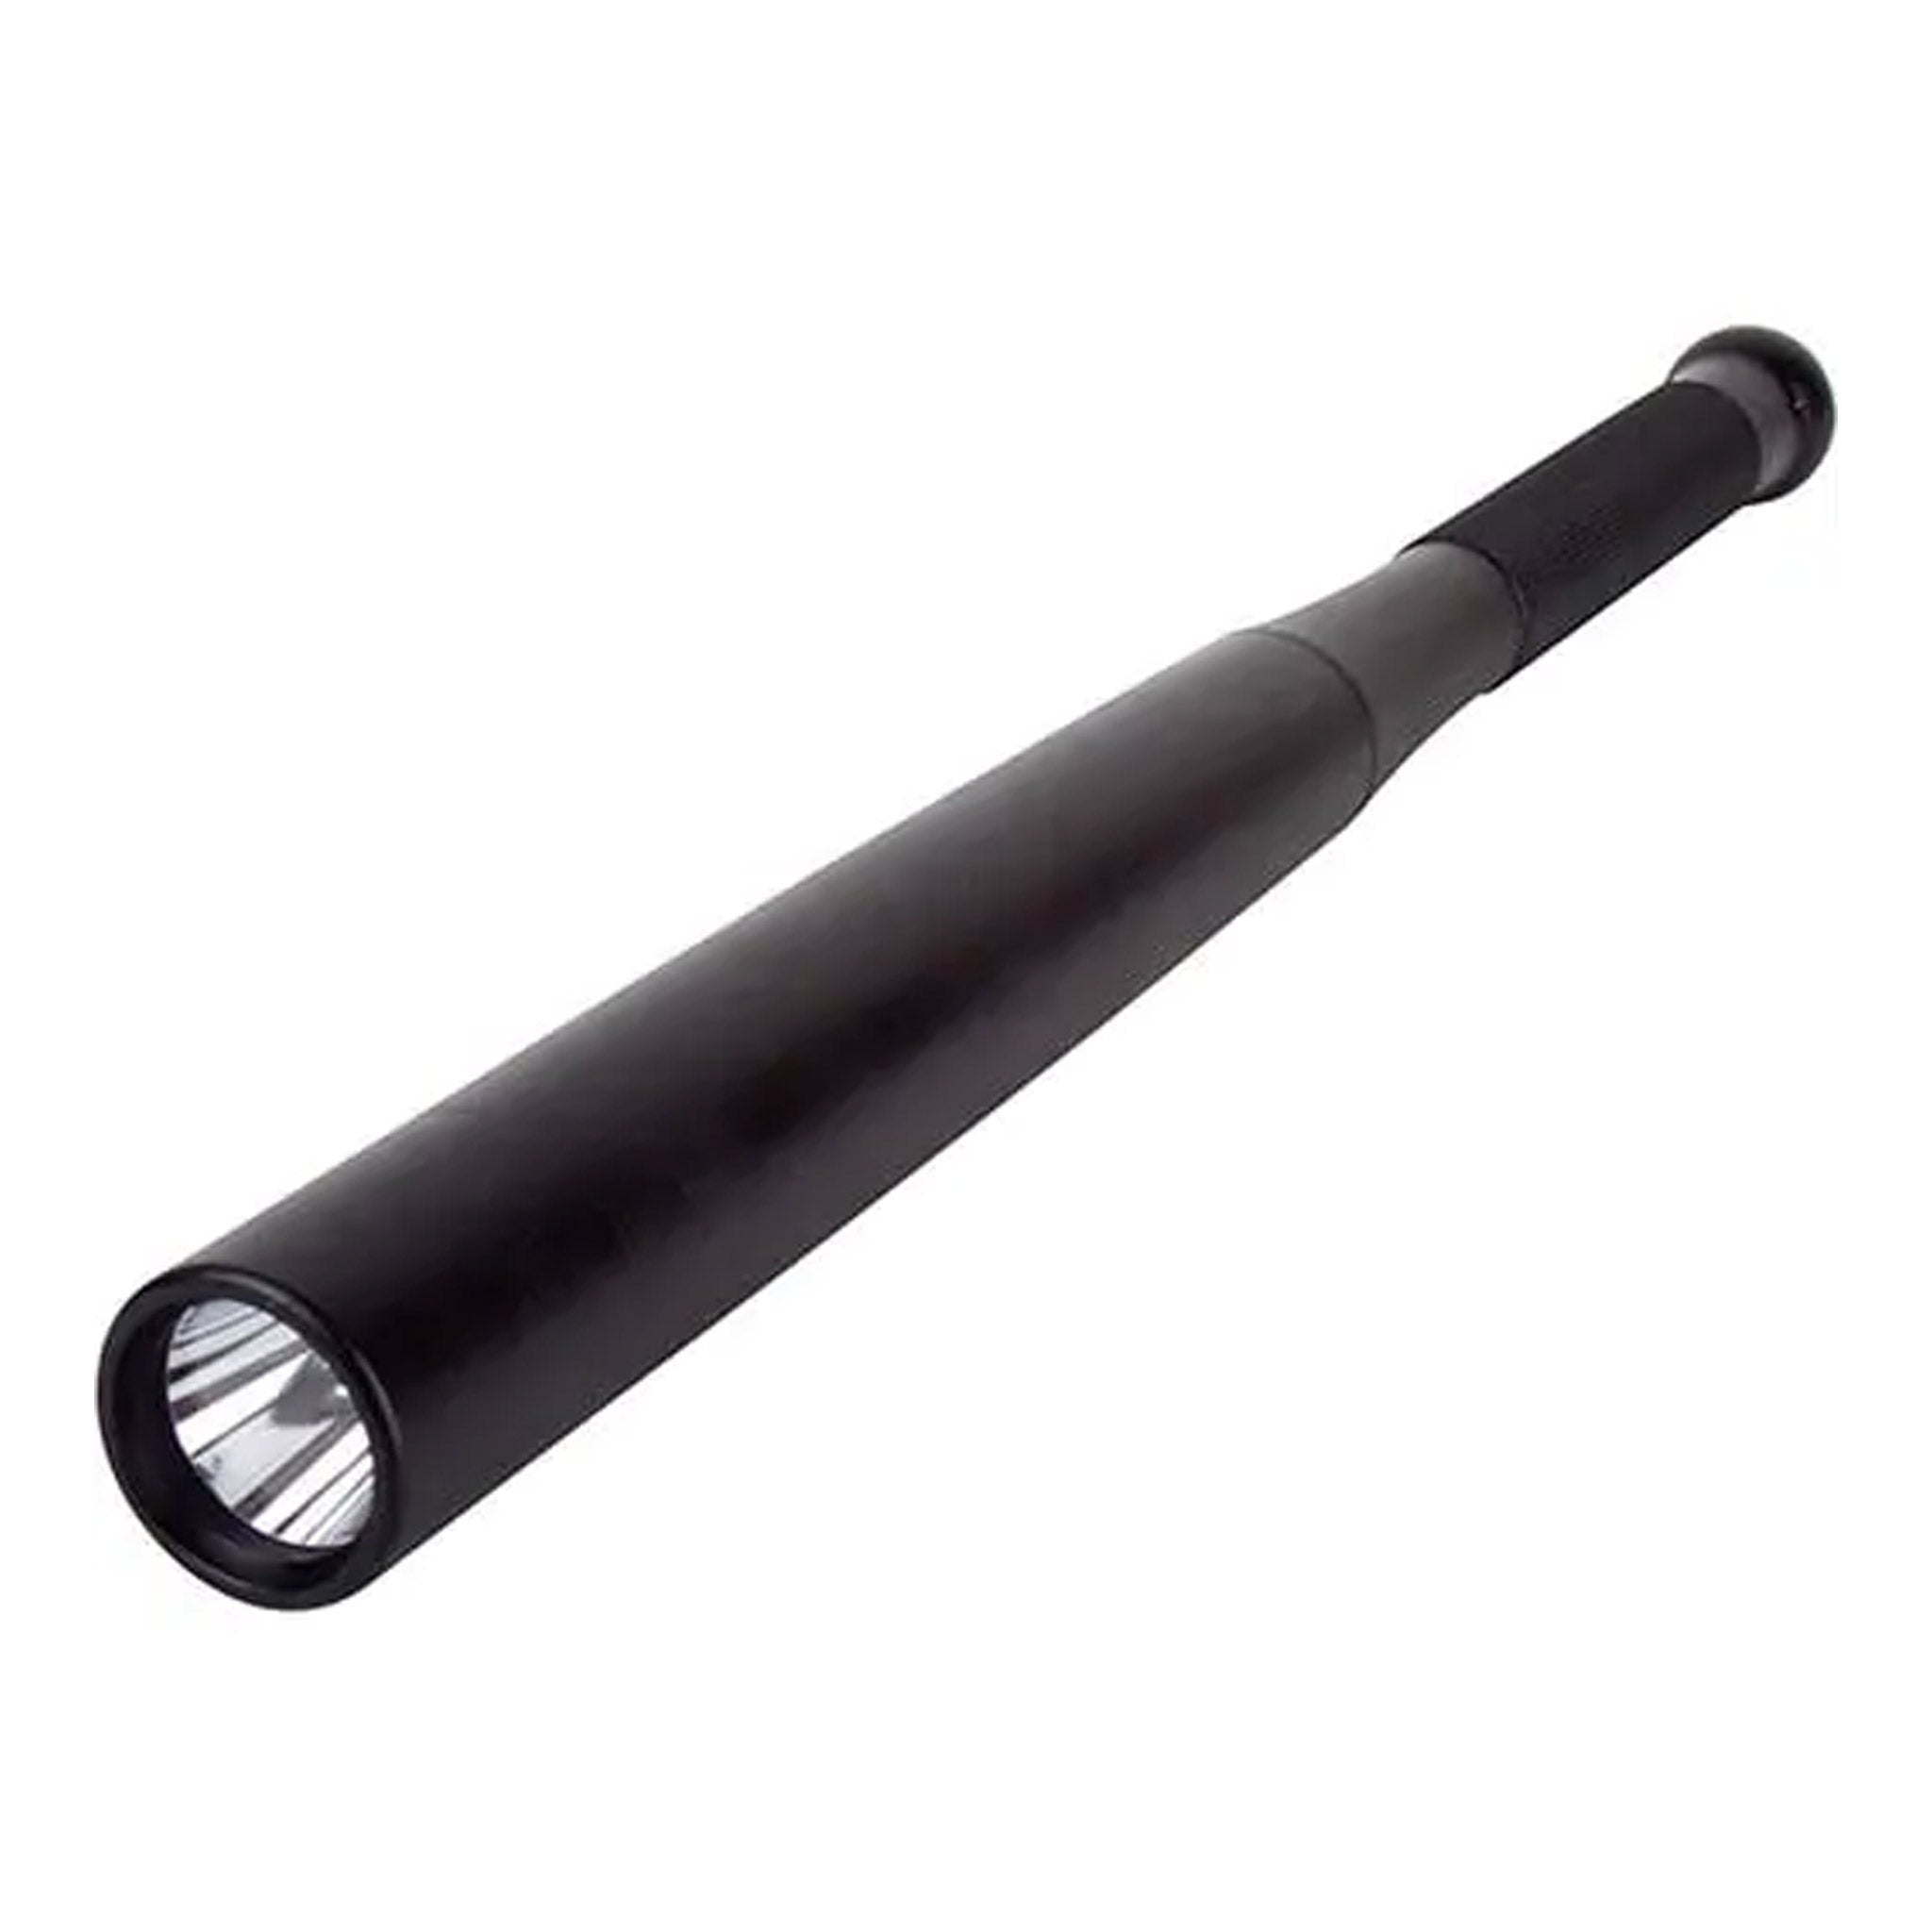 Inspection Penlight with Laser Pointer - 56026R